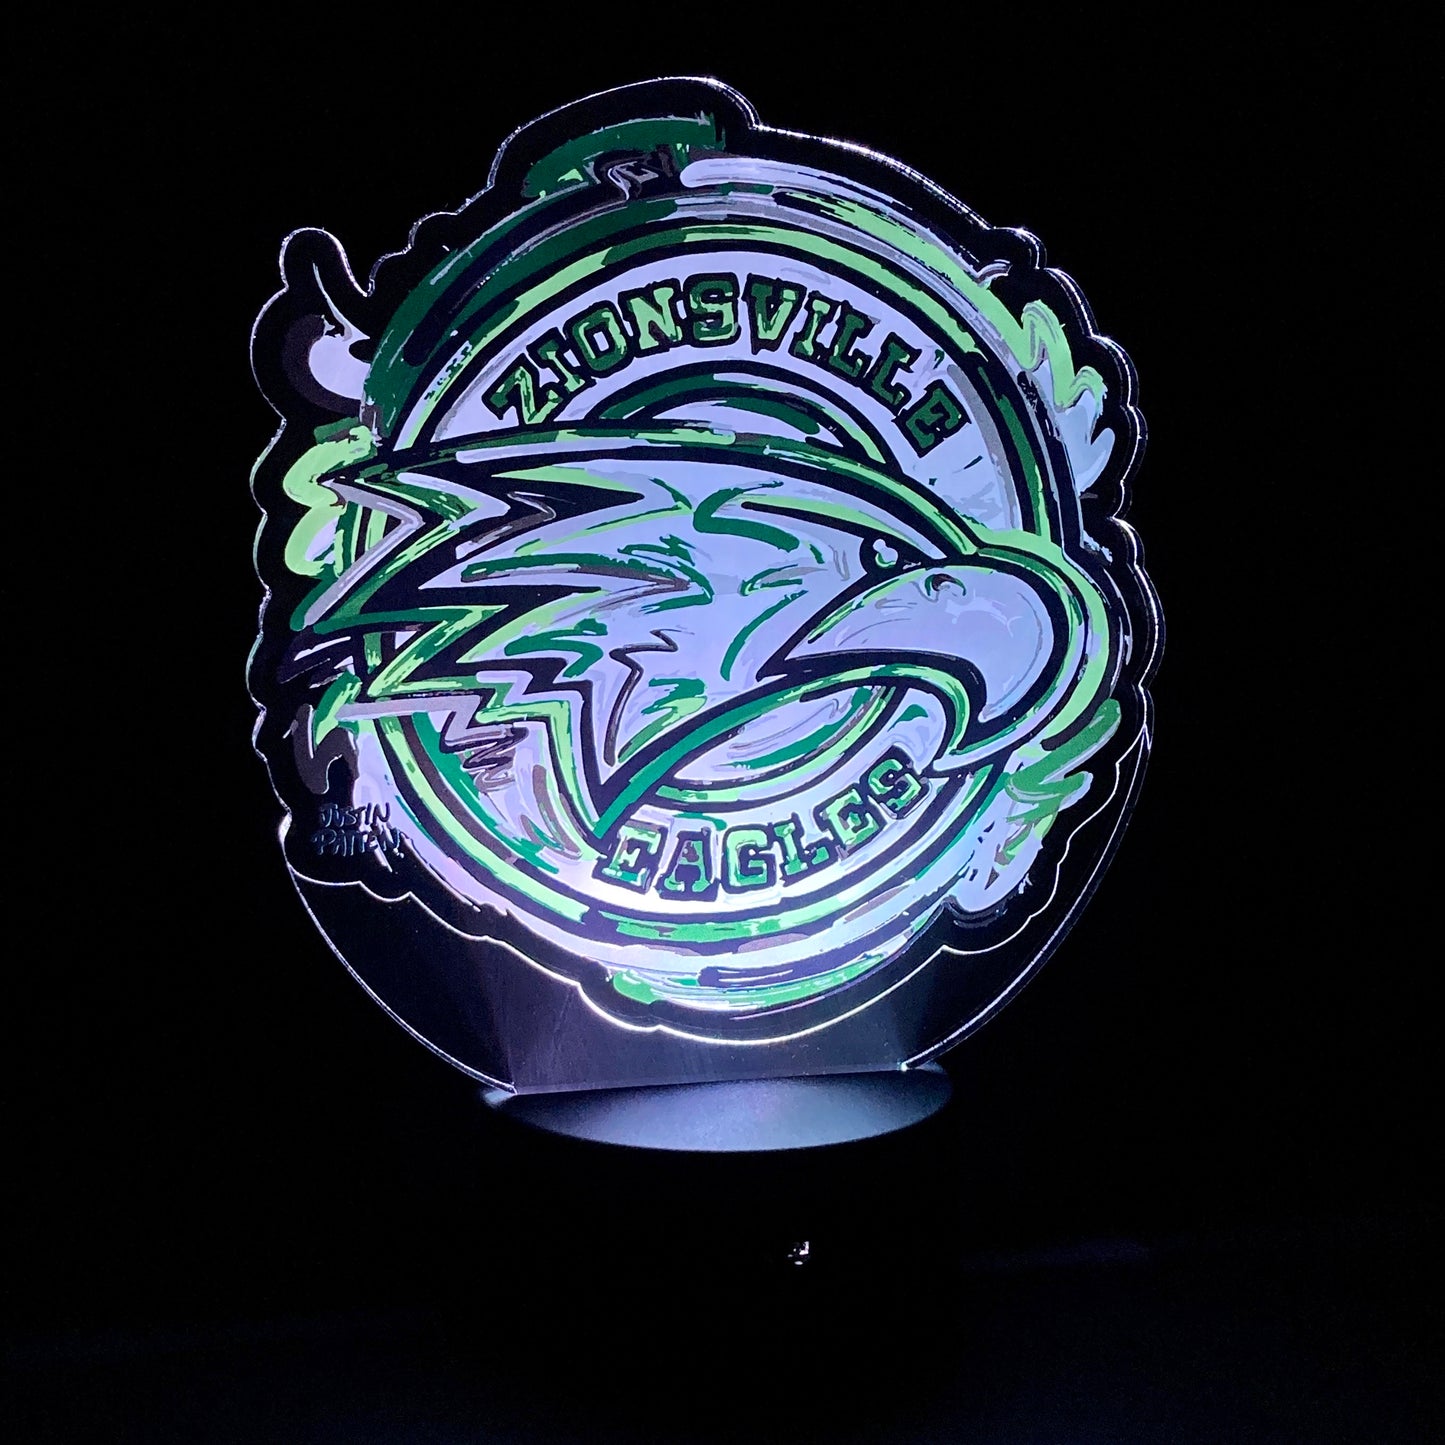 Zionsville Indiana Eagle LED Light by Justin Patten